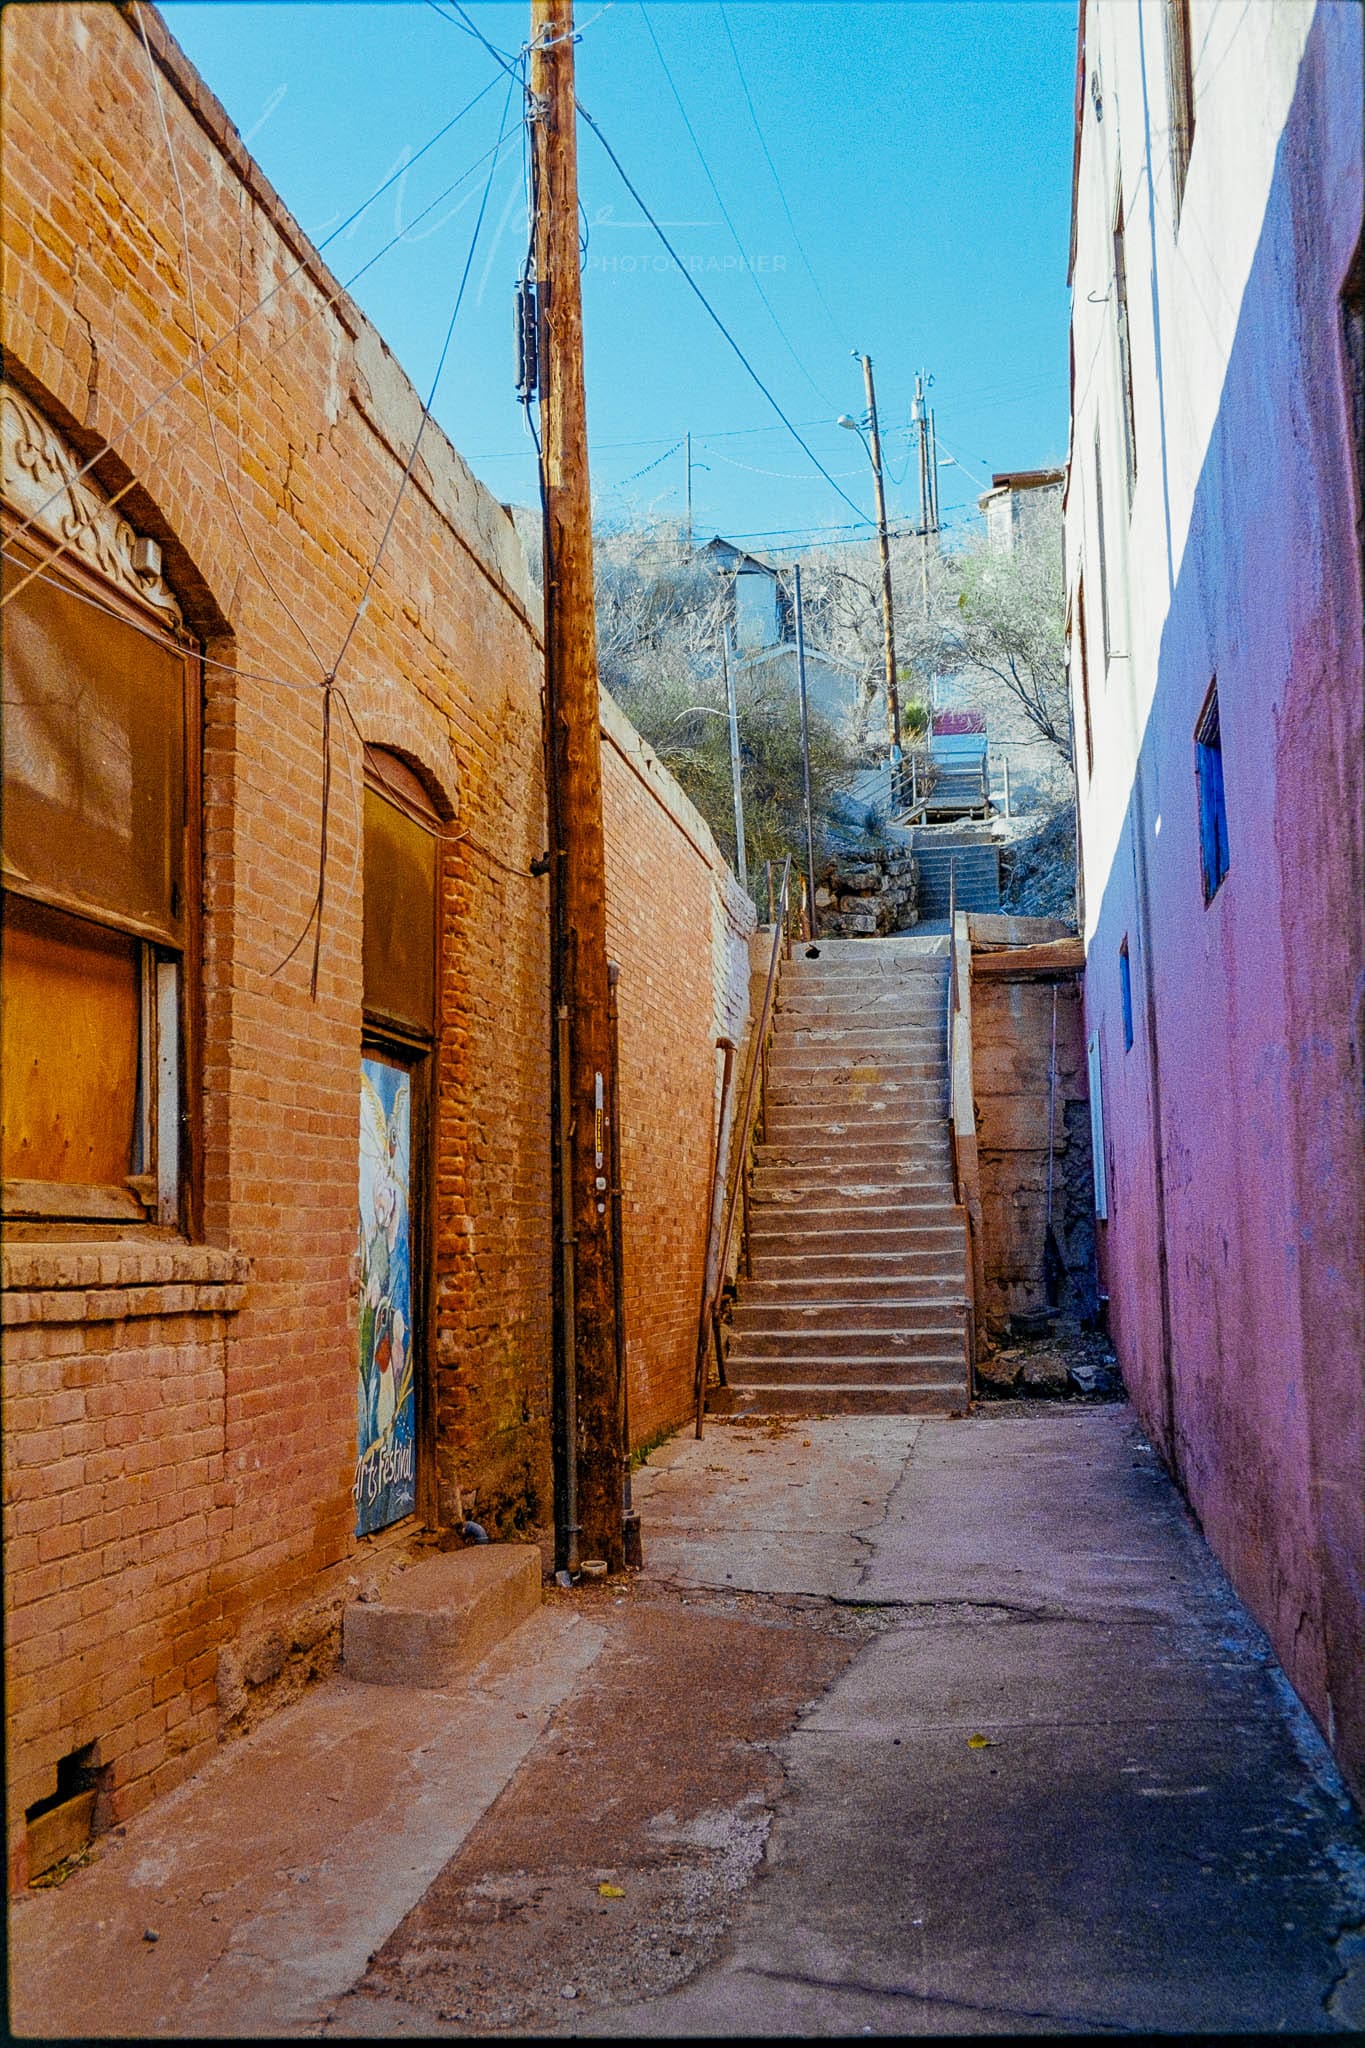 Dimly lit urban alleyway with contrasting buildings leading to a well-worn, sunlit staircase.